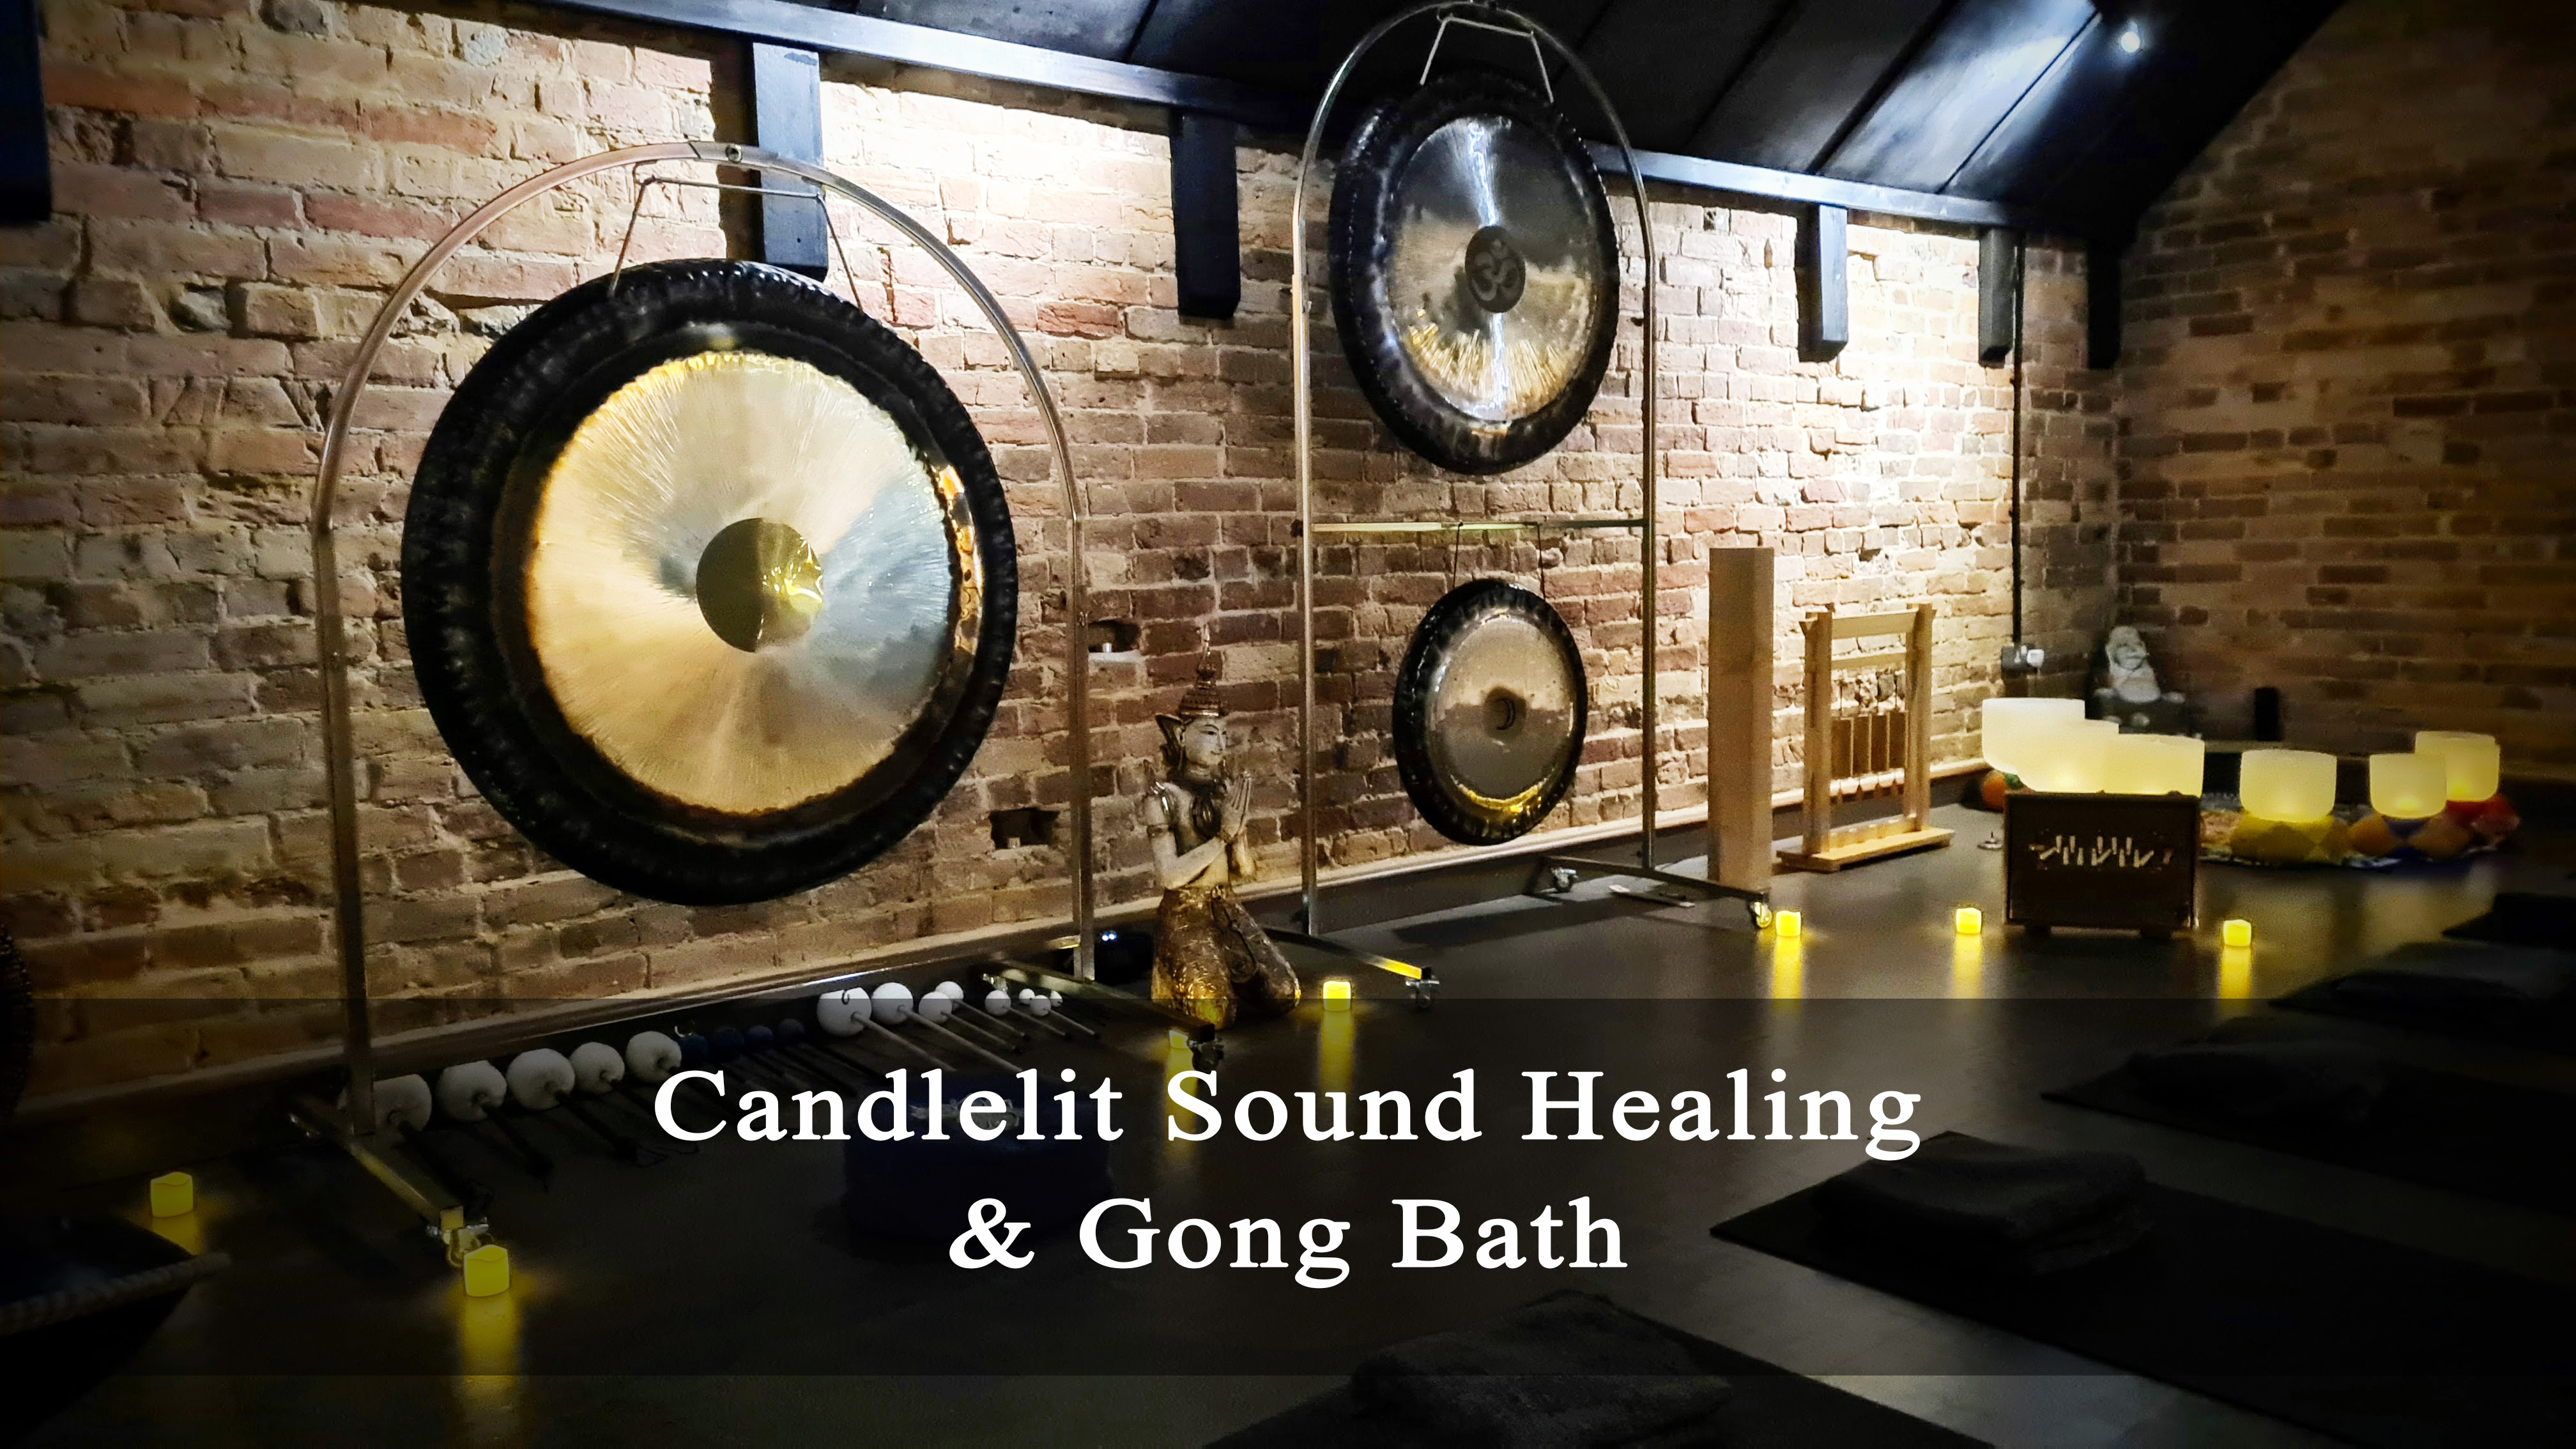 Candlelit Sound Healing Gong Bath - Every Friday Evening